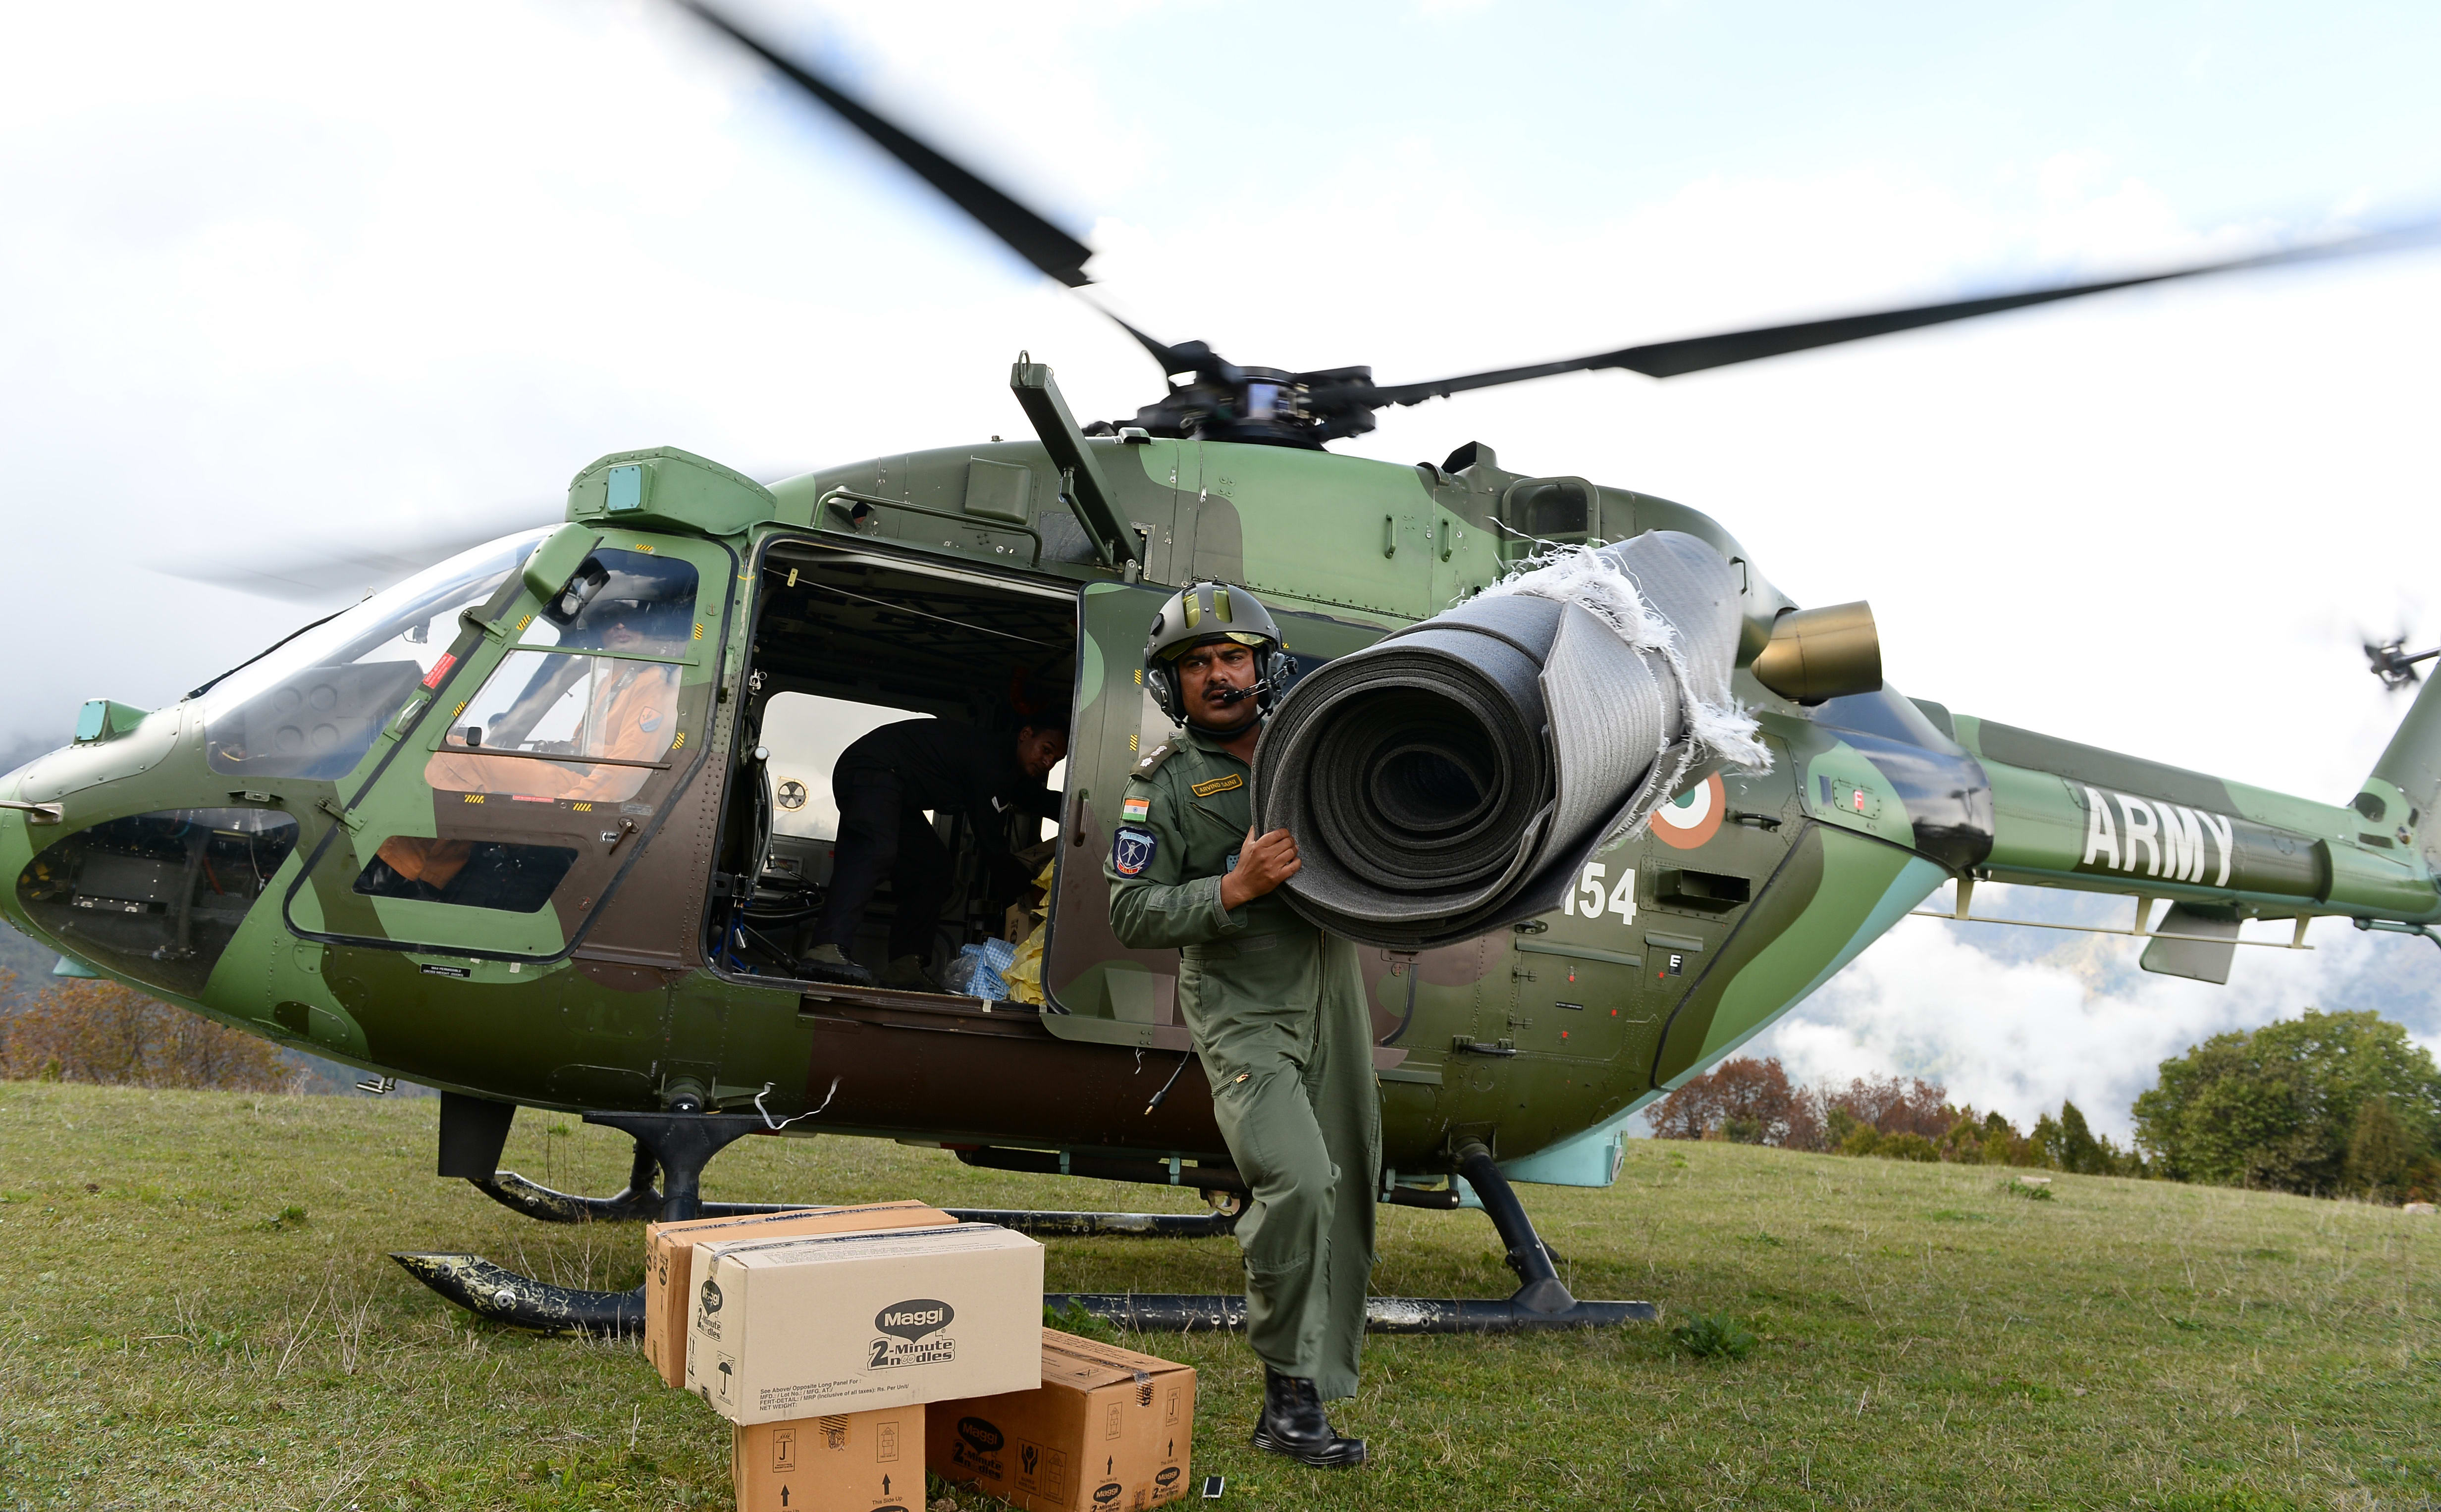 An Indian Air Force (IAF) helicopter pilot unloads relief aid in the village of Laprak.